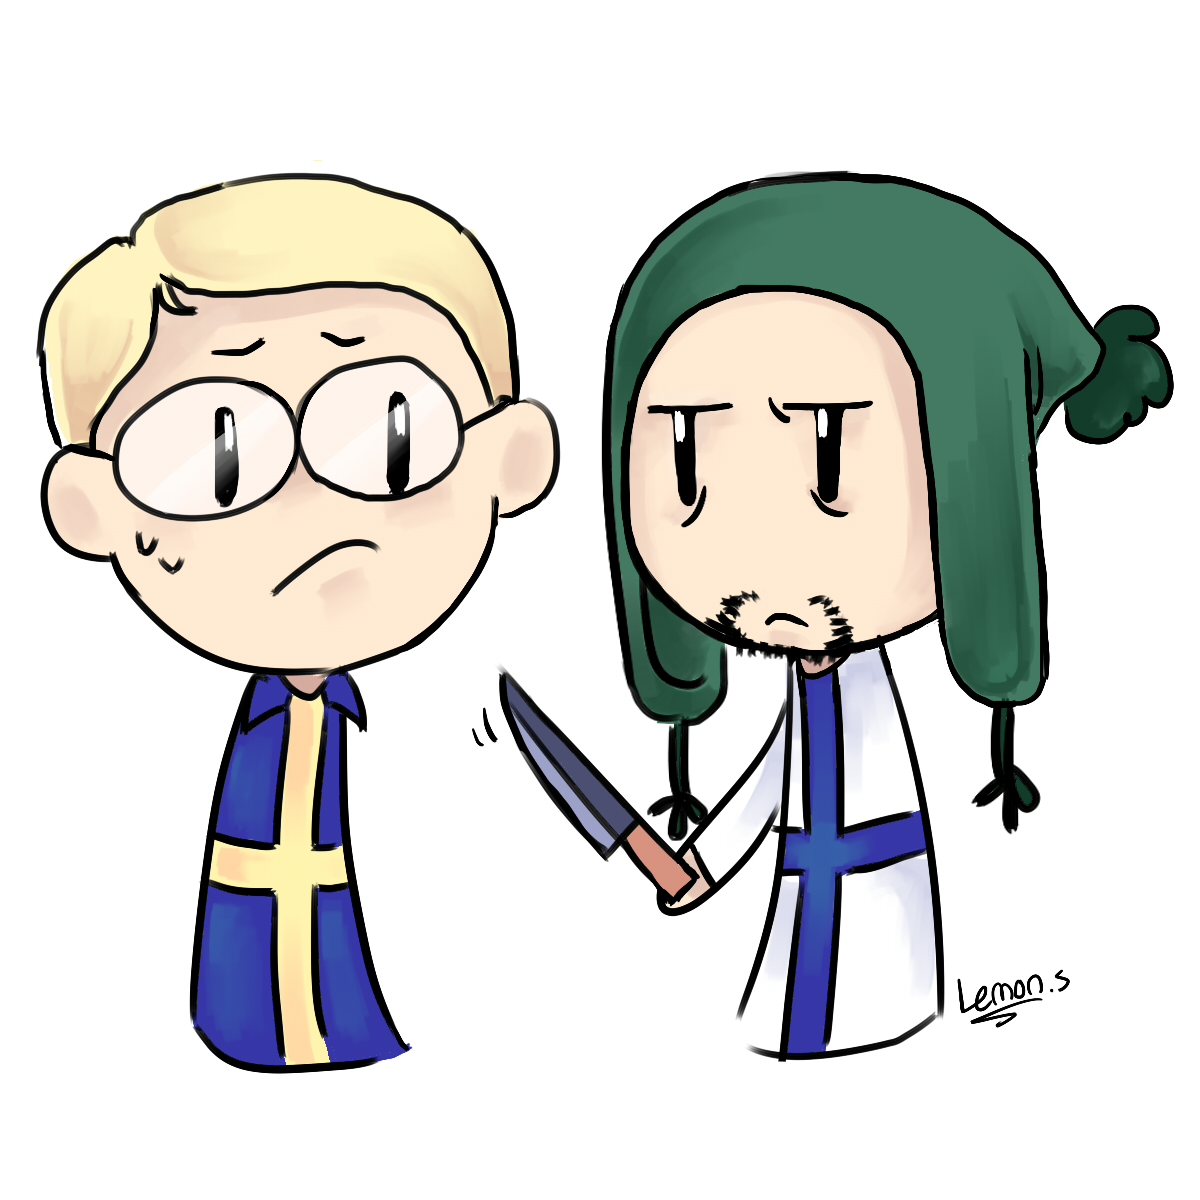 Sweden and Finland doodle